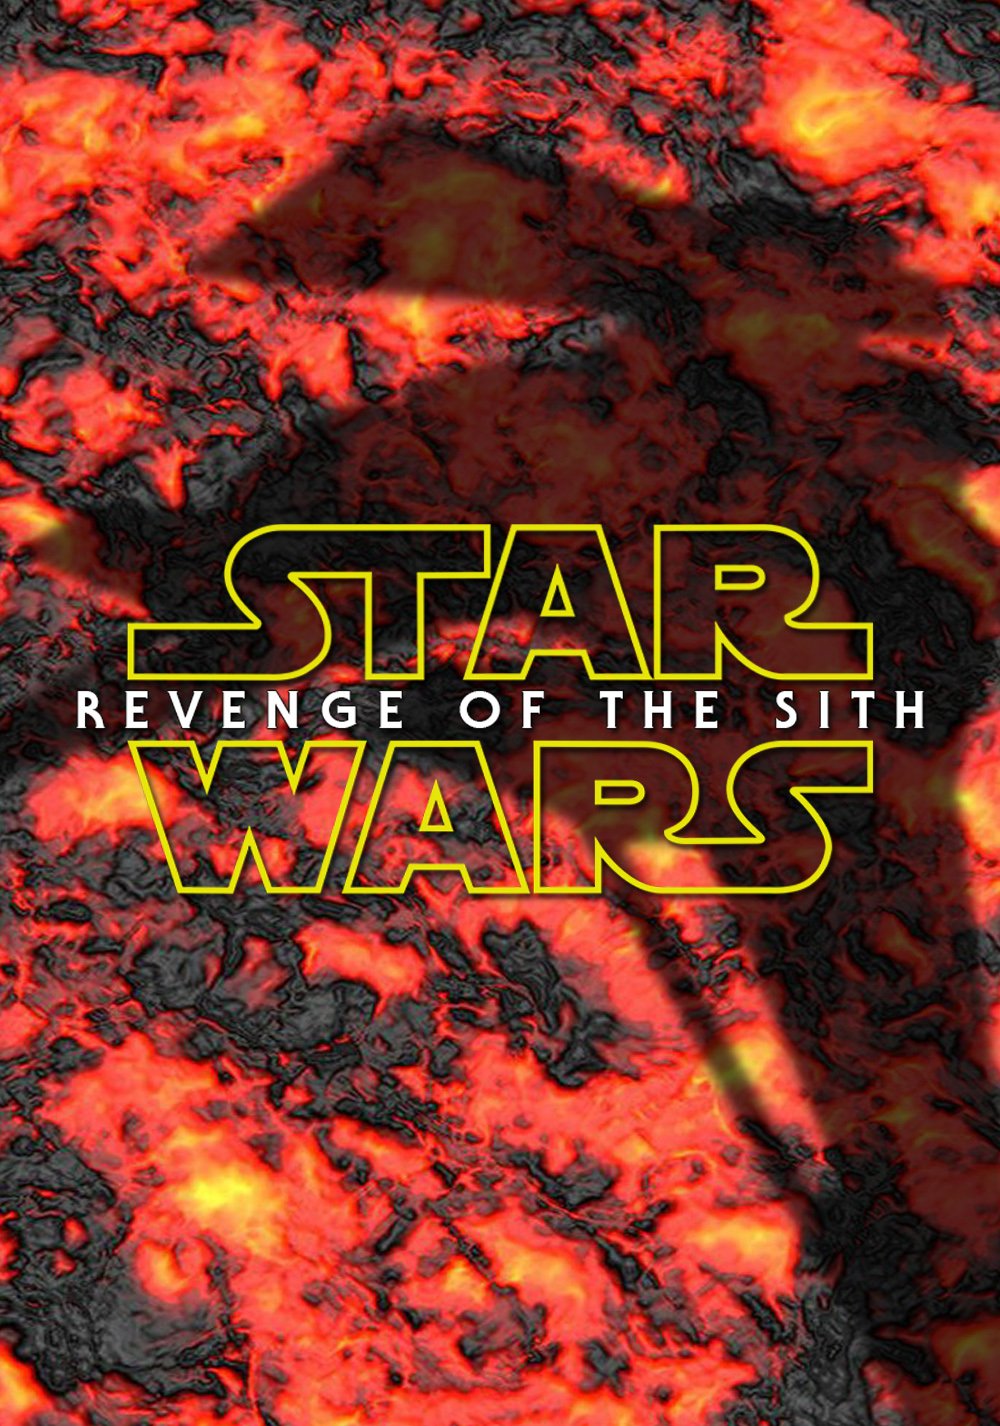 download the new version for iphoneStar Wars Ep. III: Revenge of the Sith